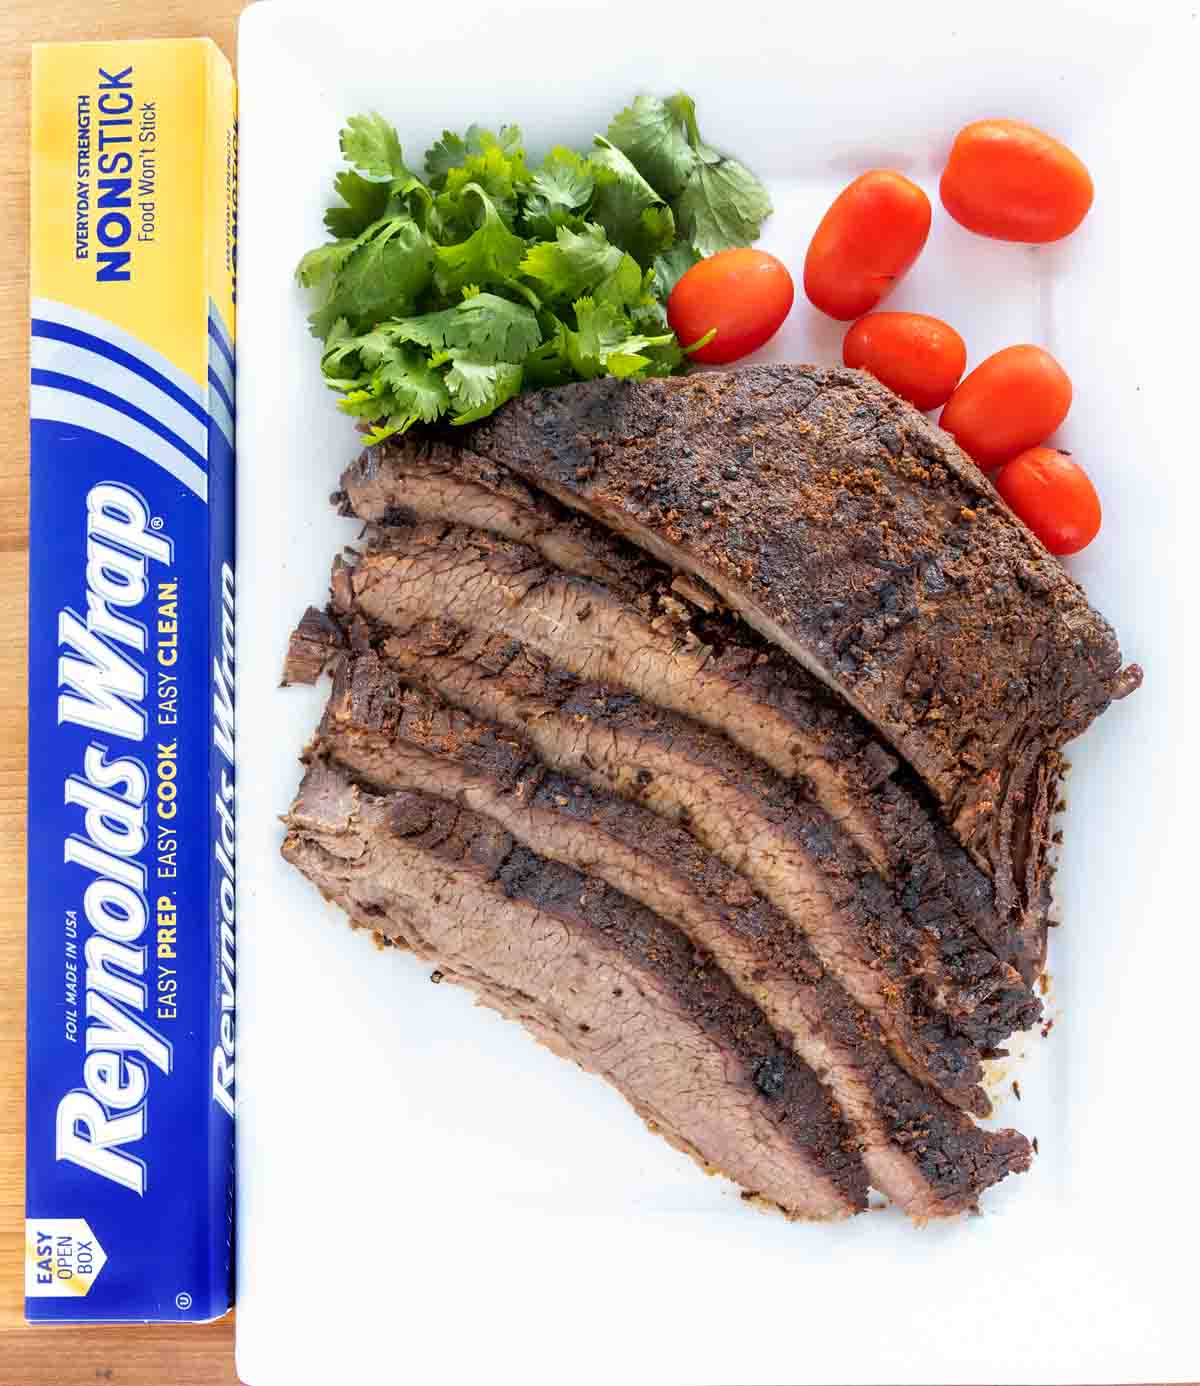 sliced dry rub roasted brisket with cilantro and tomatoes on on a white platter next to a box of reynolds foil